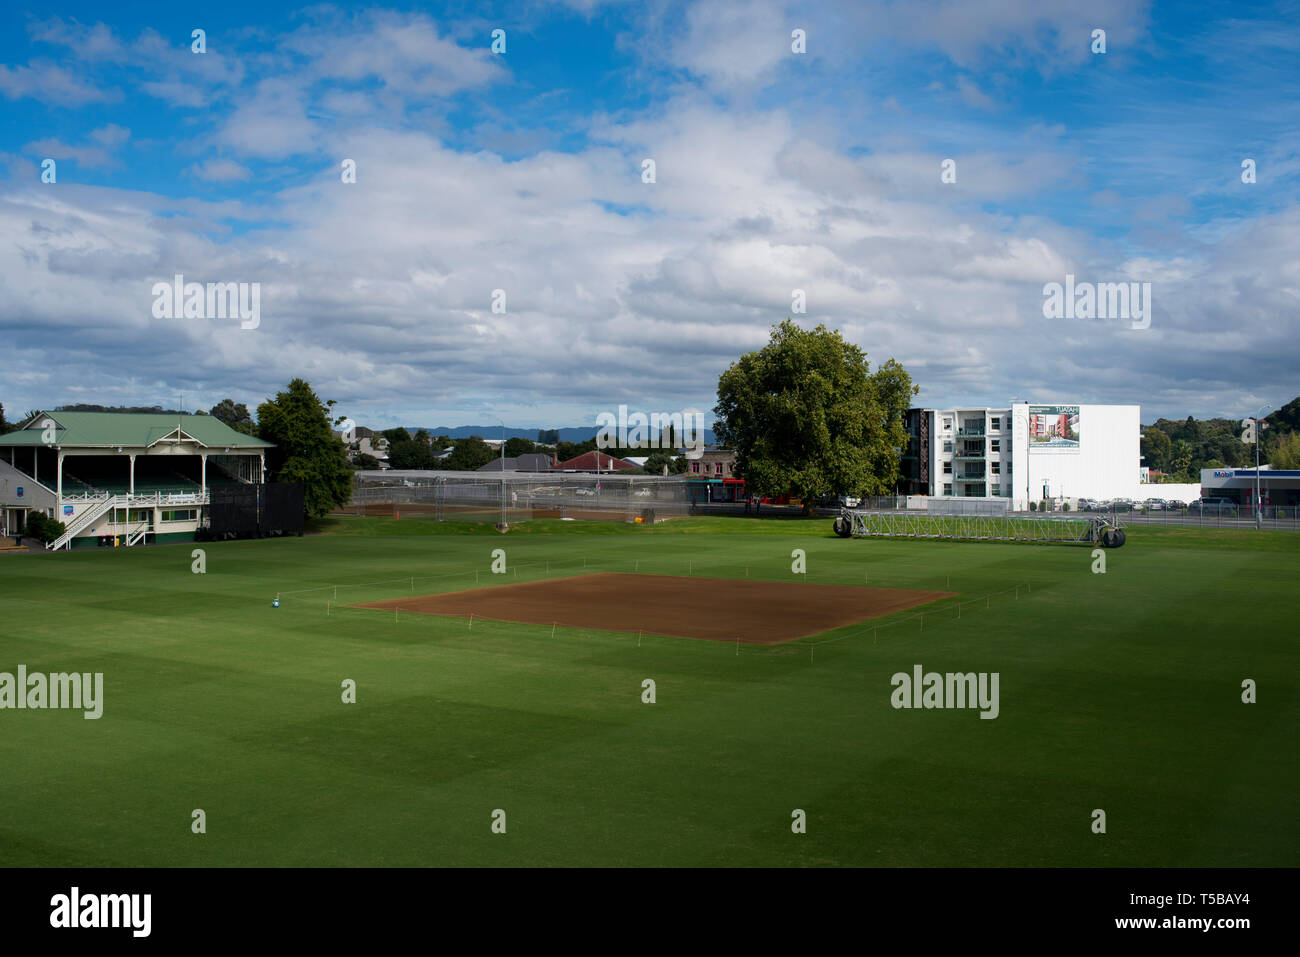 Auckland, New Zealand. Cricket pitch during the off-season Stock Photo